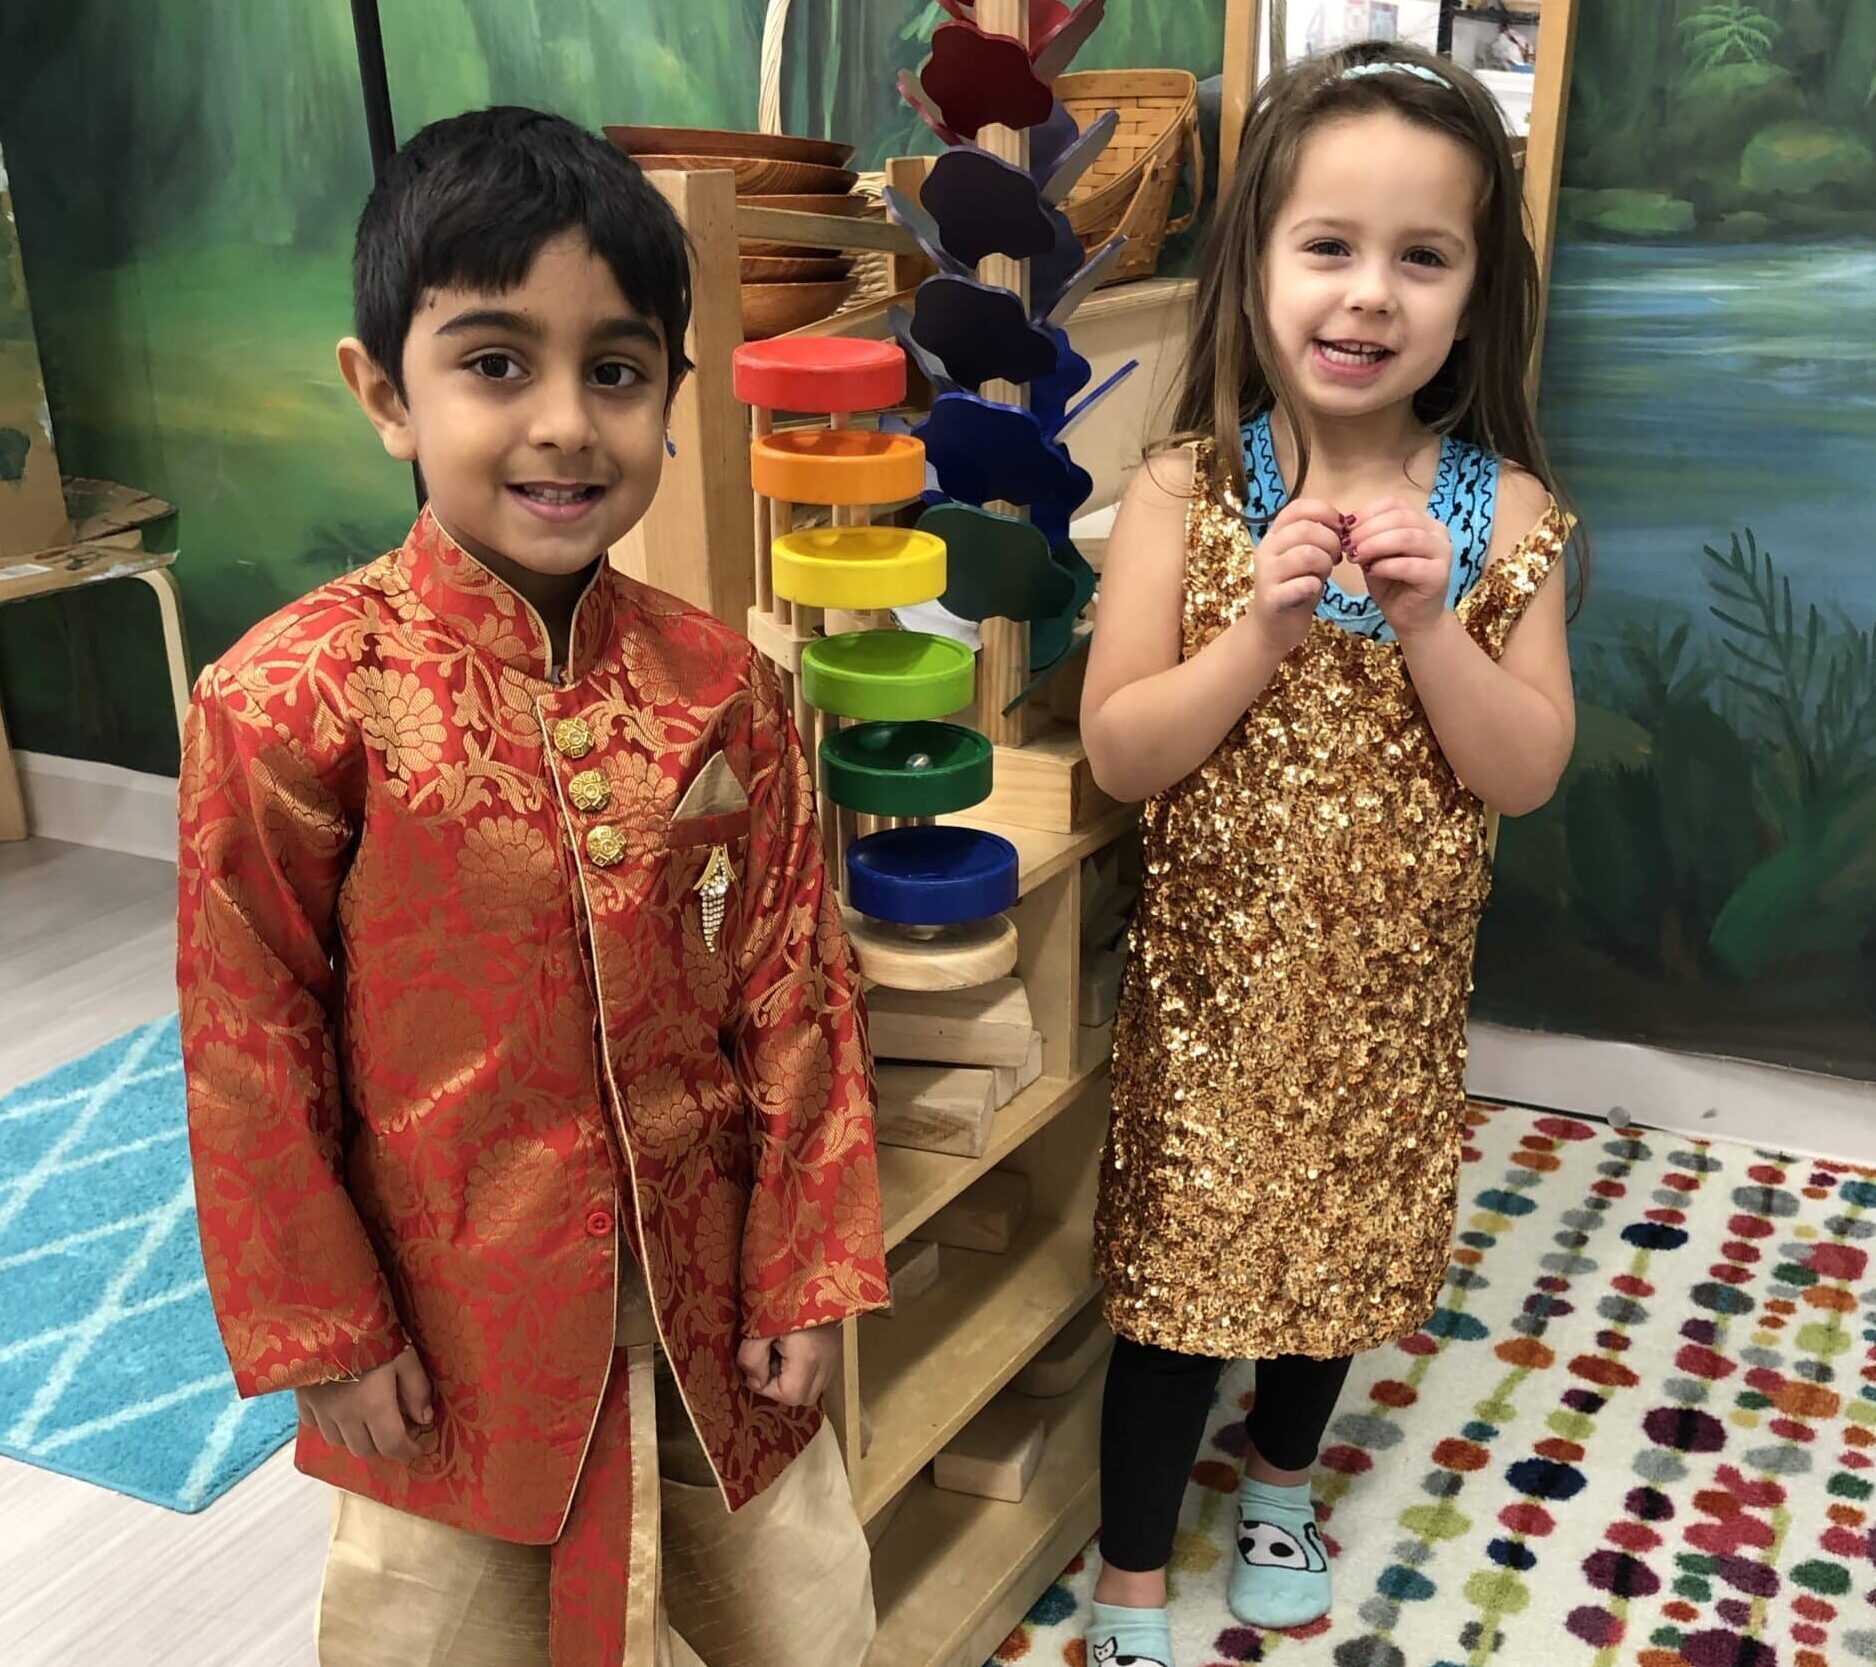 Children at a Diwali Celebration at Bubbles Academy in Chicago